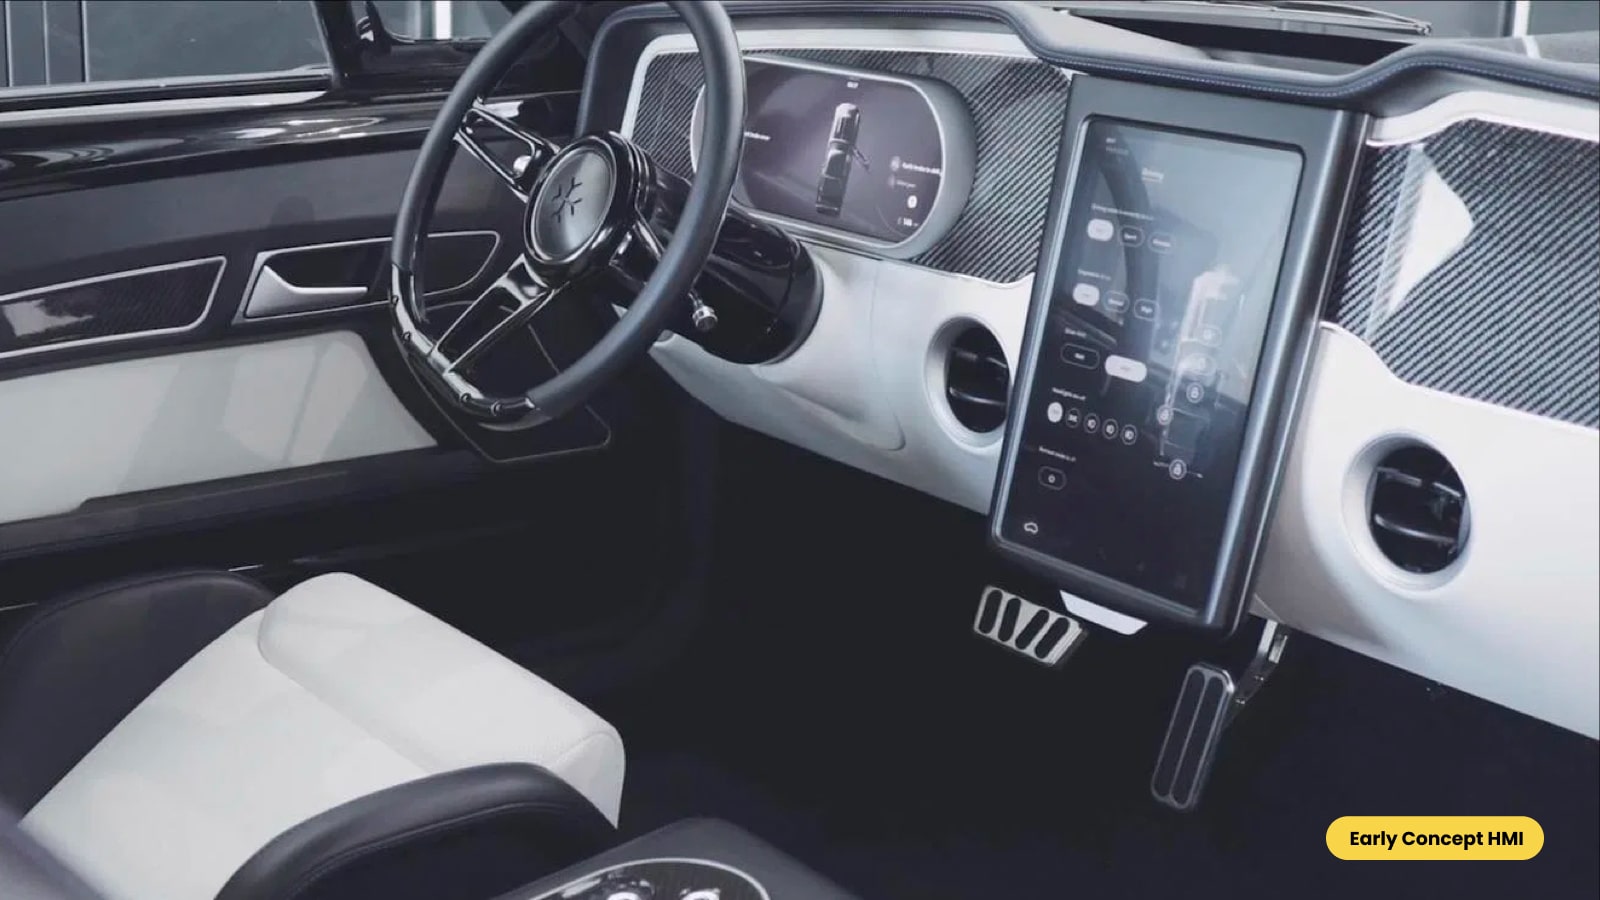 Charge Cars Mustang Concept Interior and interface